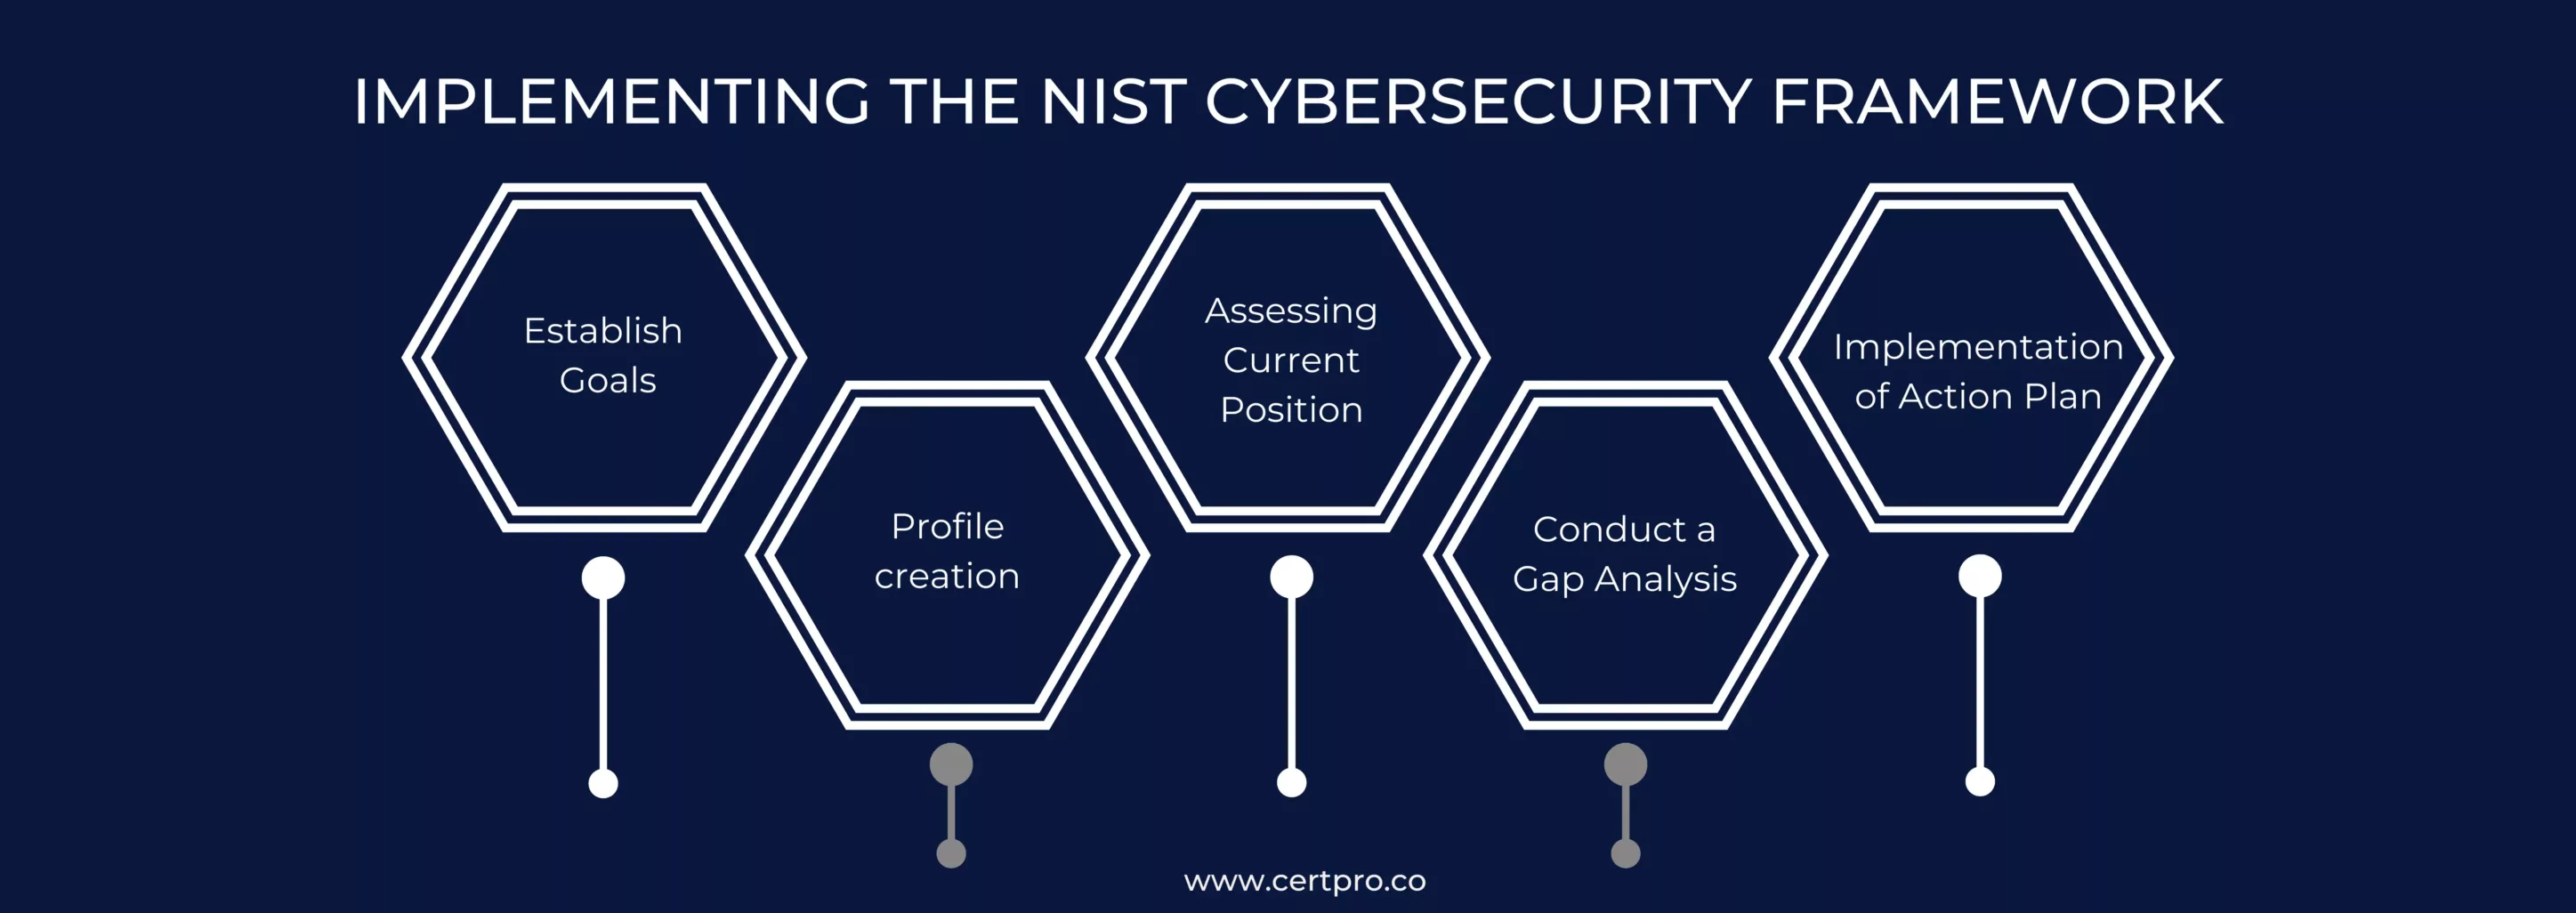 IMPLEMENTING THE NIST CYBERSECURITY FRAMEWORK